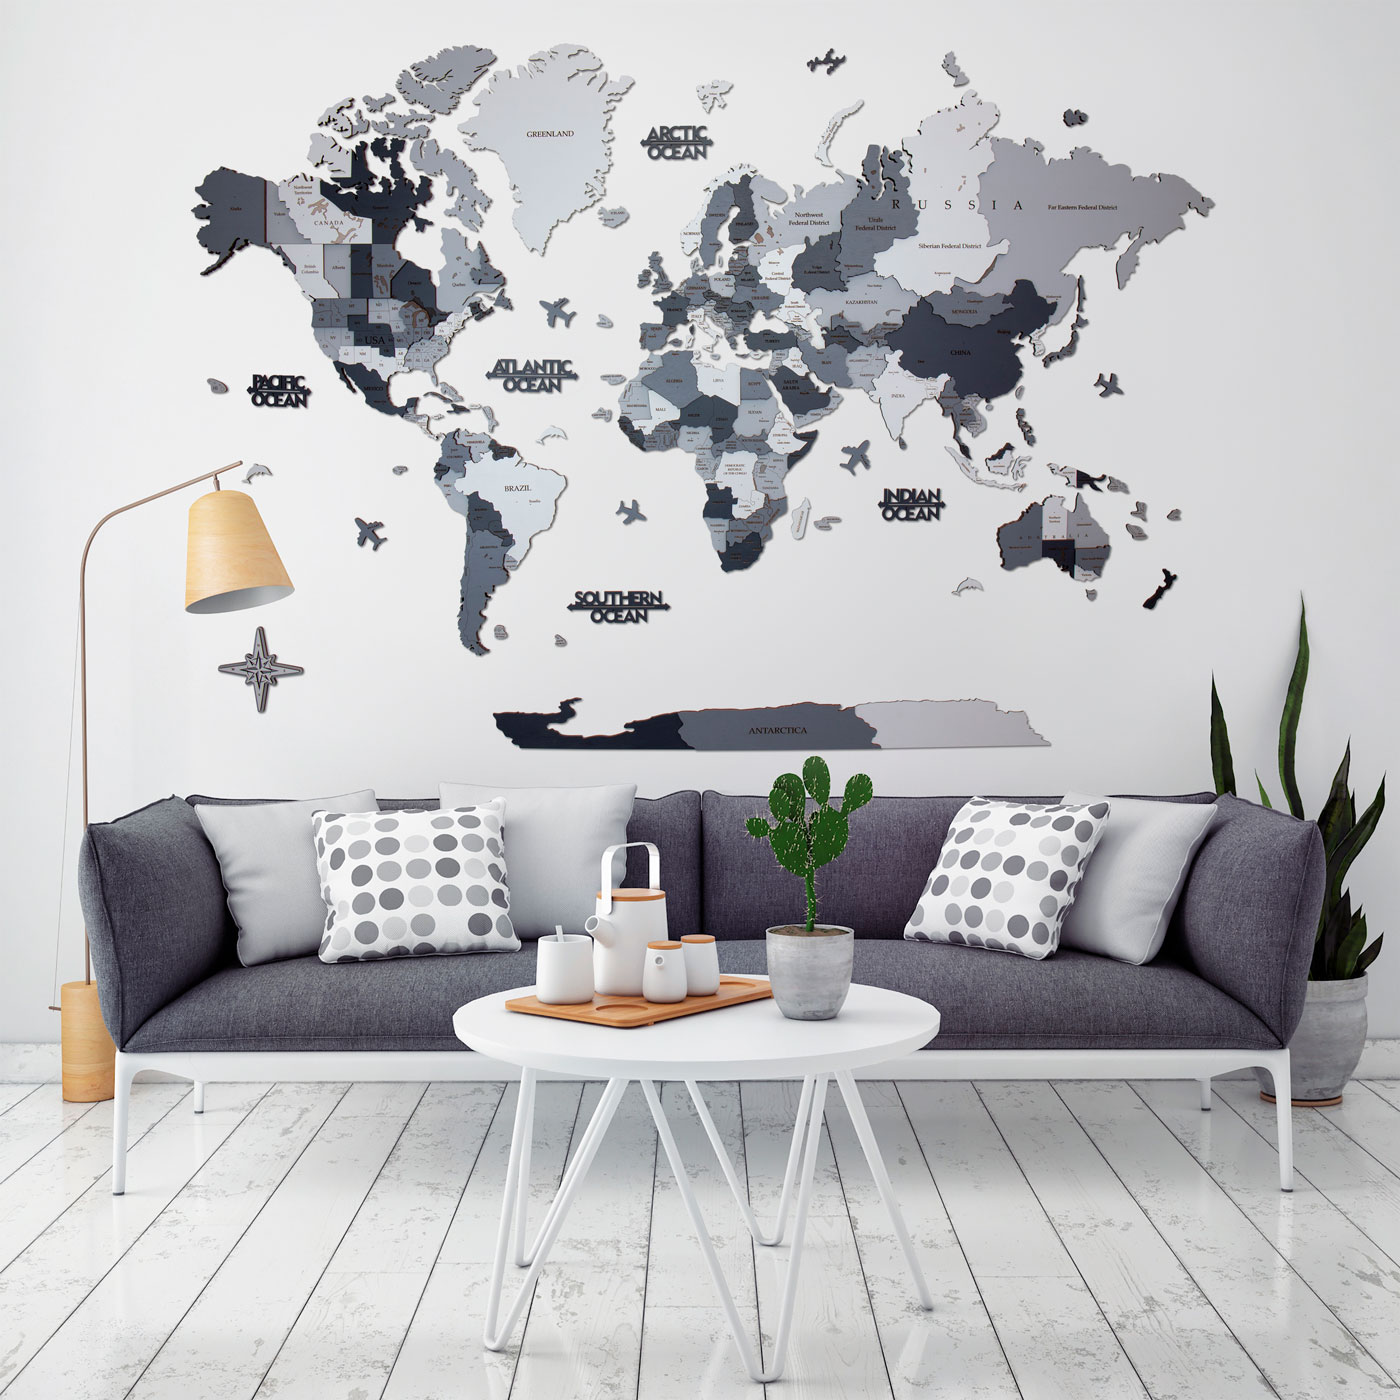 3d wooden world map. Wall wooden decor. Urban camouflage colors of map by Ksilart. Grey wooden world map